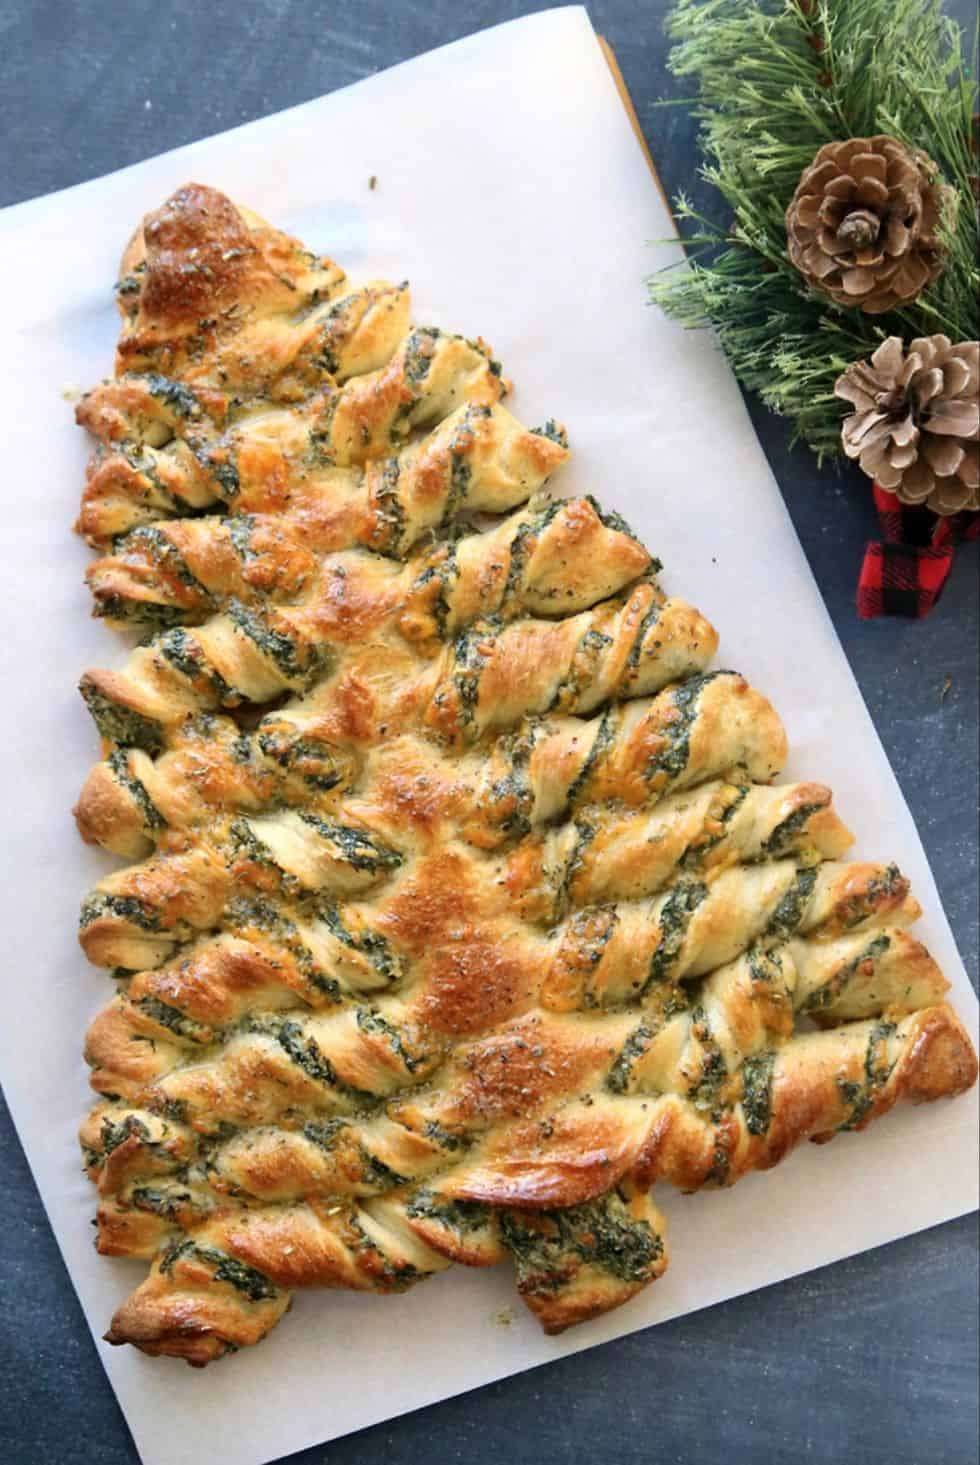 Holiday Party Snack Ideas
 15 Christmas Party Food Ideas That Will Top Previous Years